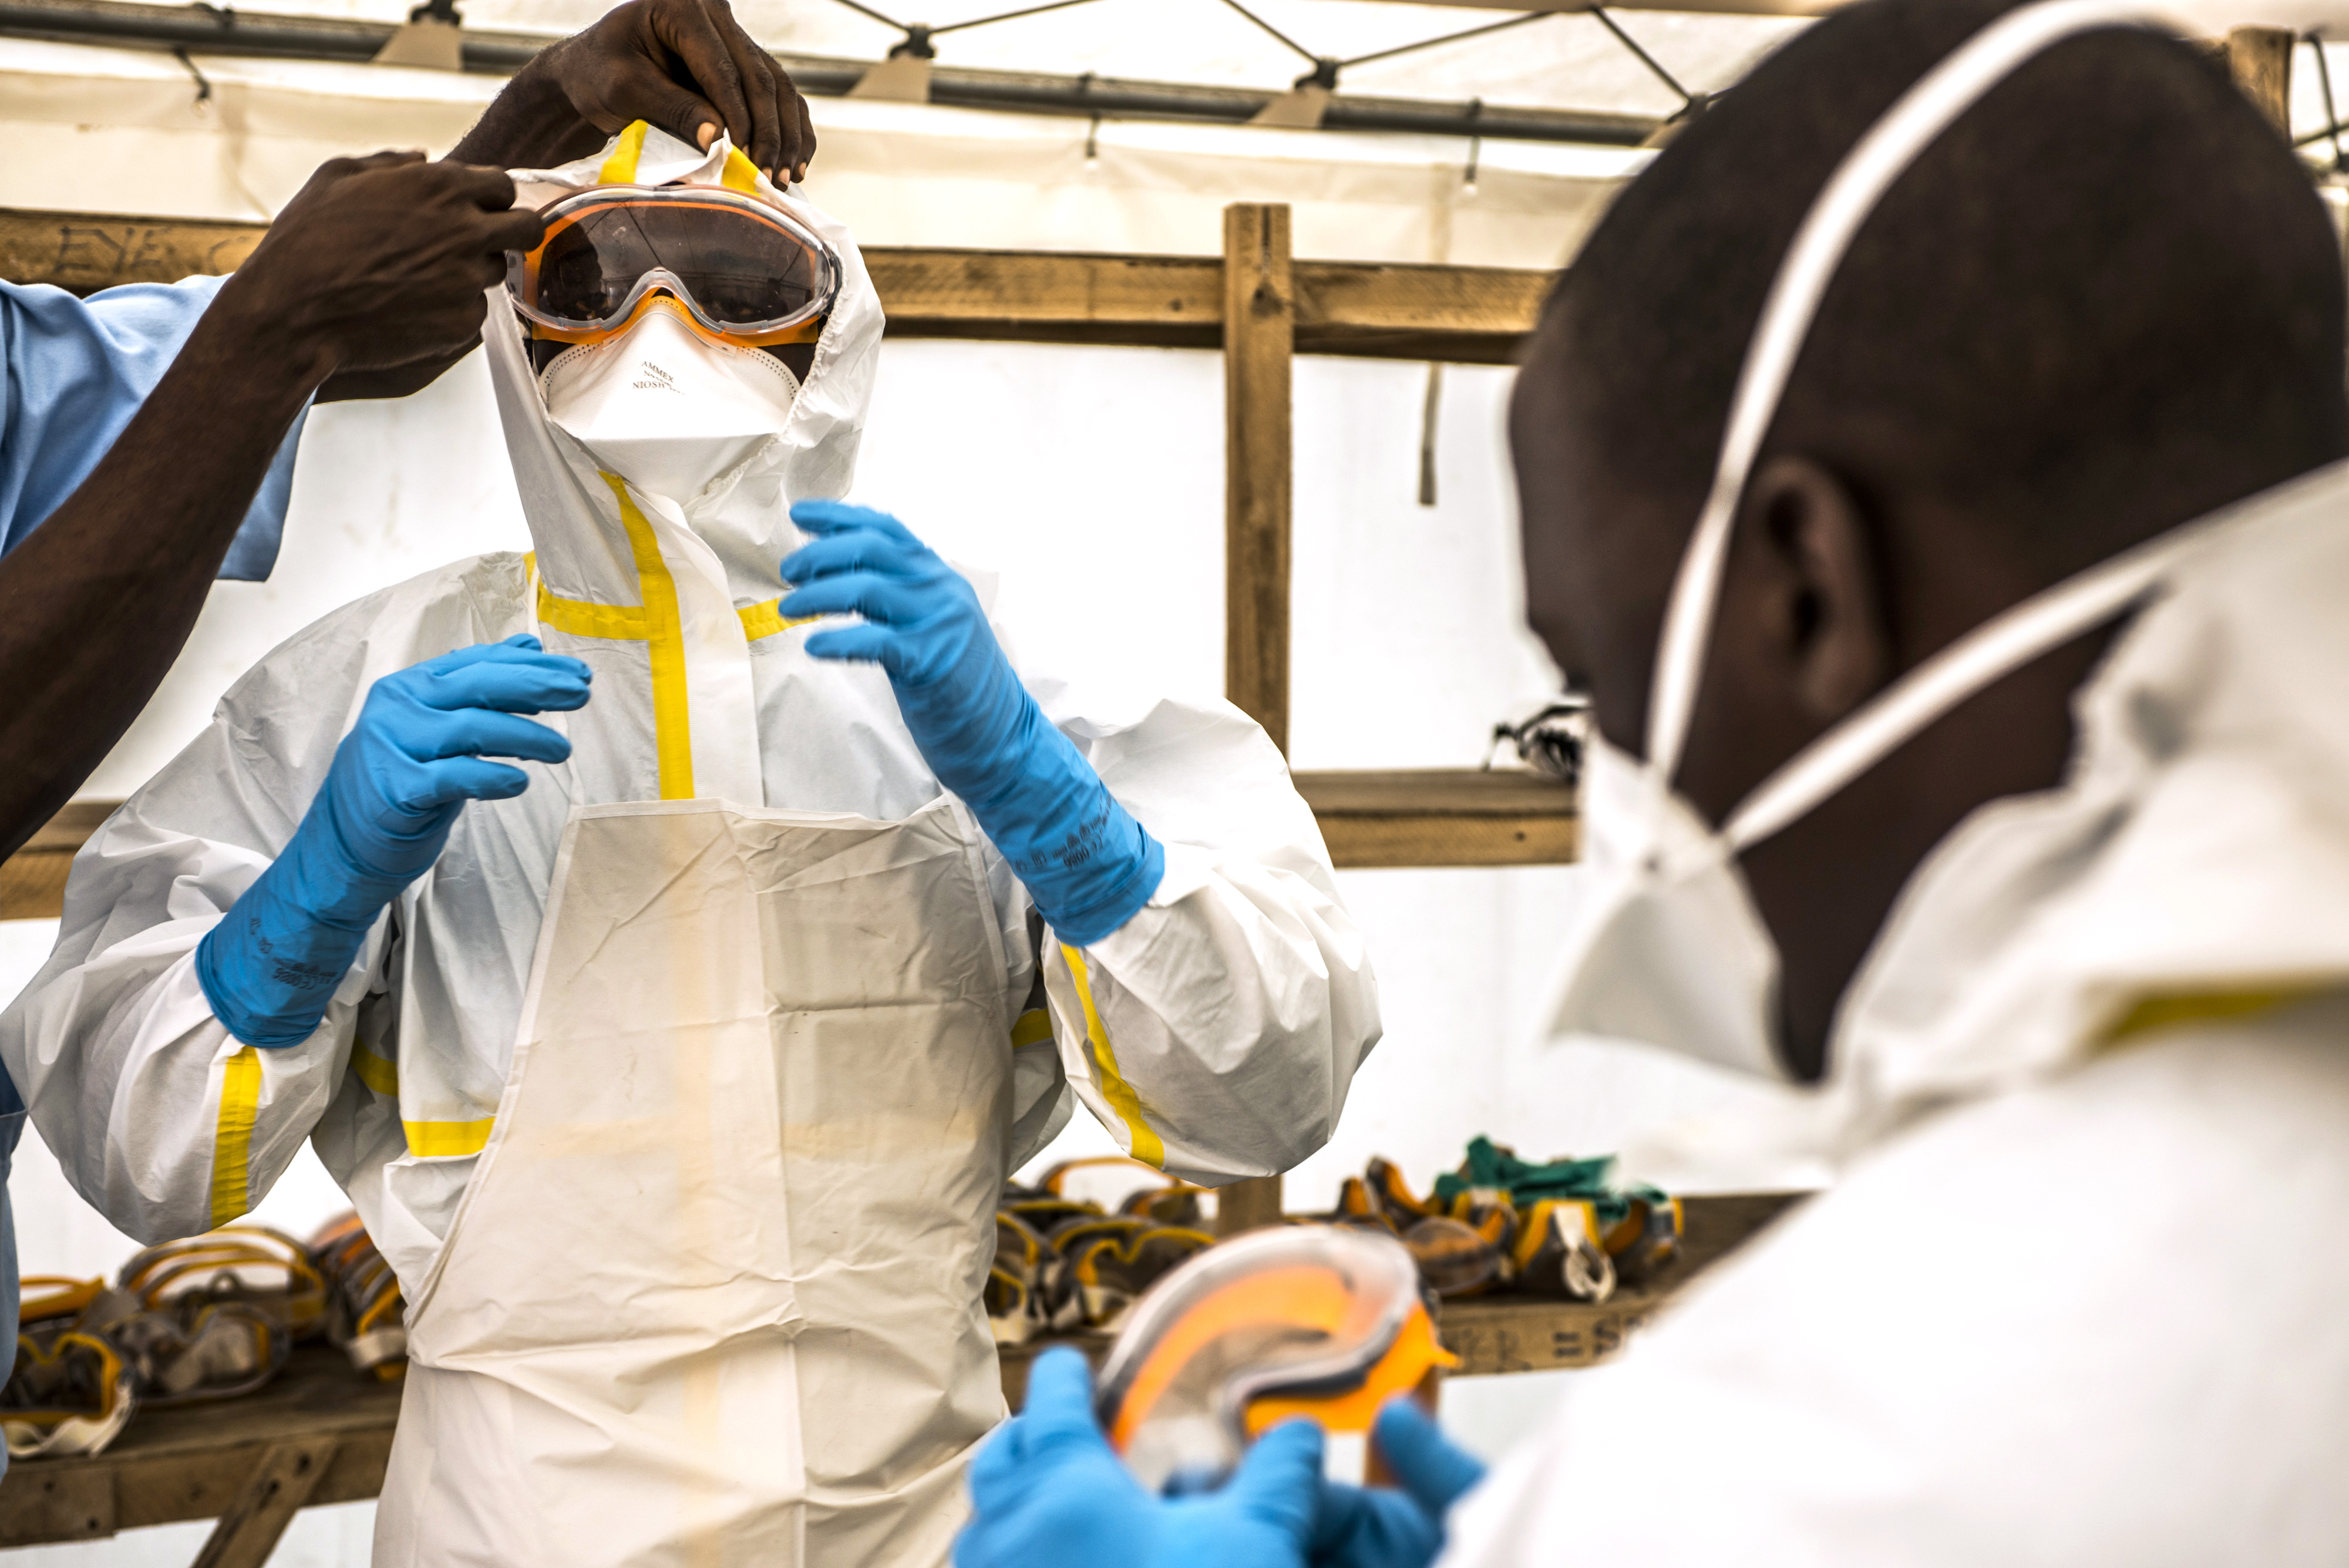 A healthcare worker helps a colleague dress in protective gear at an Ebola treatment center in Guinea, Sept. 10, 2015 (Bloomberg—Getty Images)